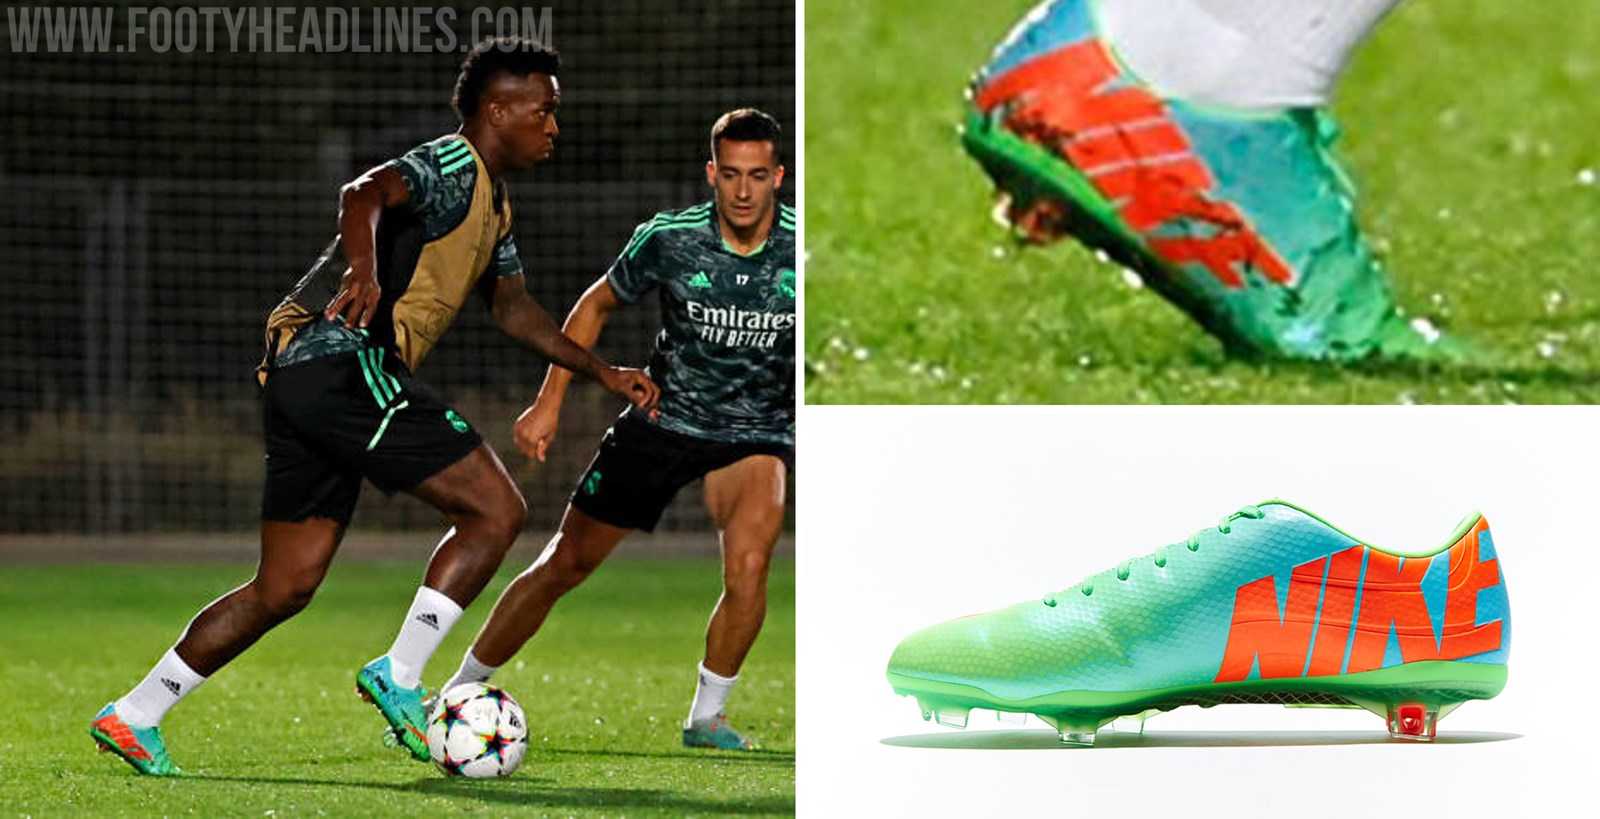 Vinicius Trains in Classic Nike Boots Footy Headlines